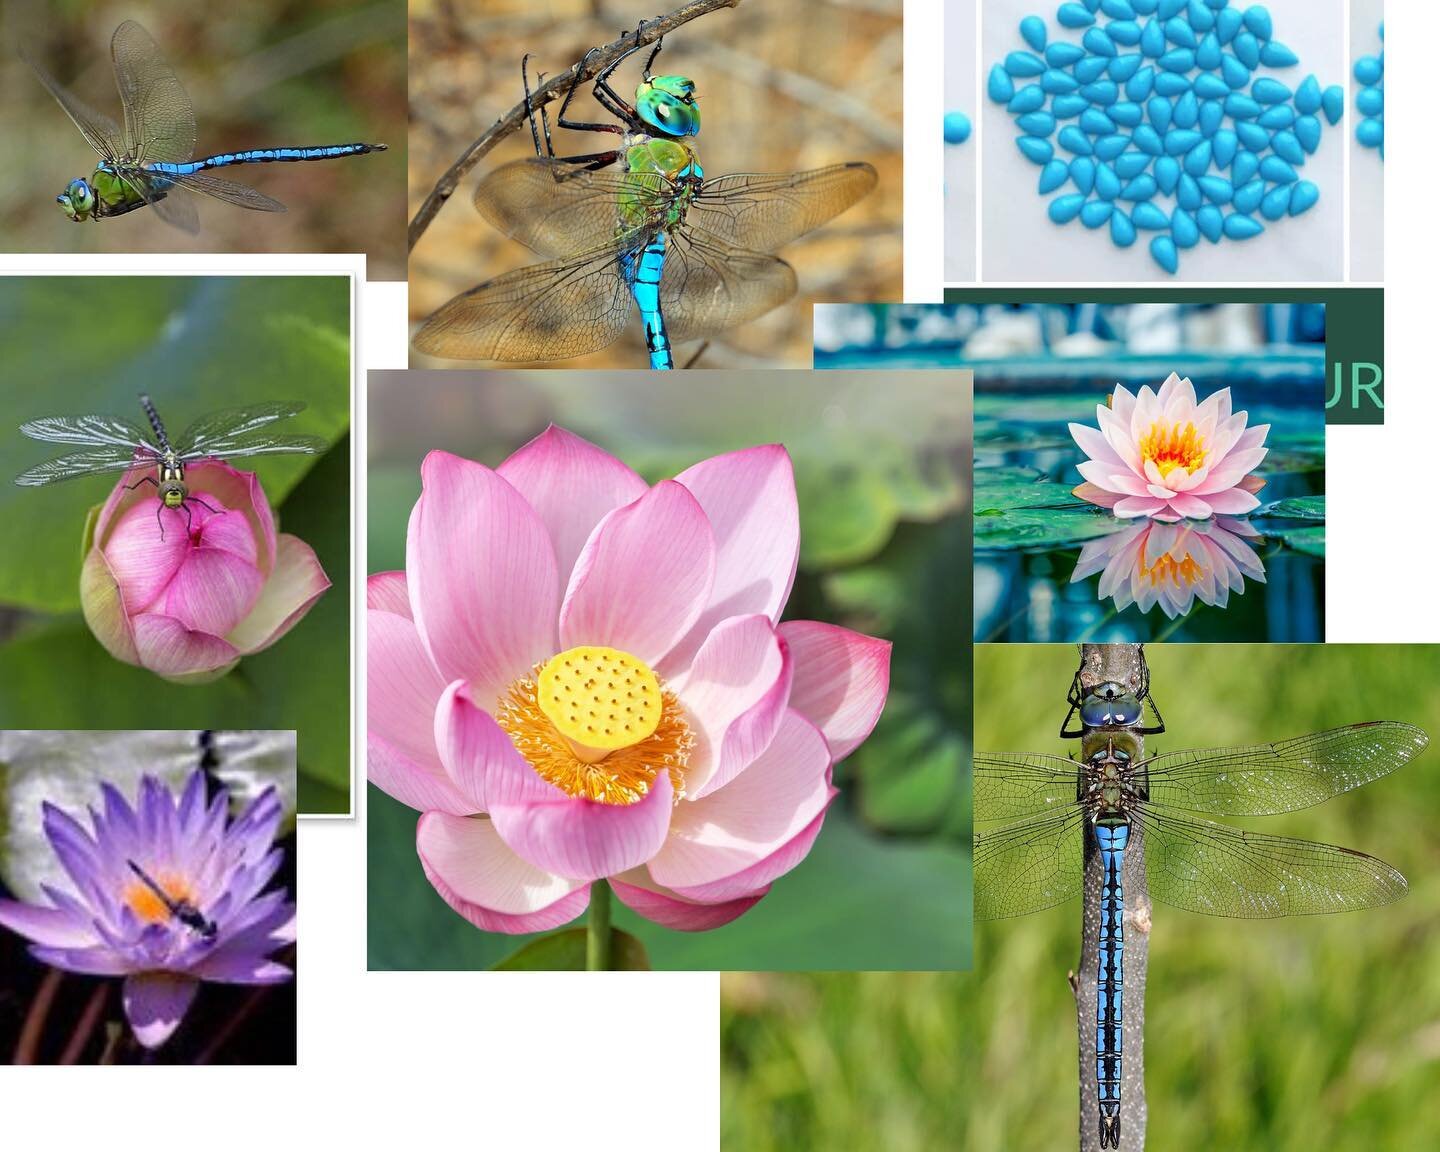 Hi, I am so very late this morning! I slept for around 15 hours last night as I had been awake most of the previous night with knee pain!
This is a recent mood board that I have been playing around with, dragonflies, water lilies, lotus flowers and s